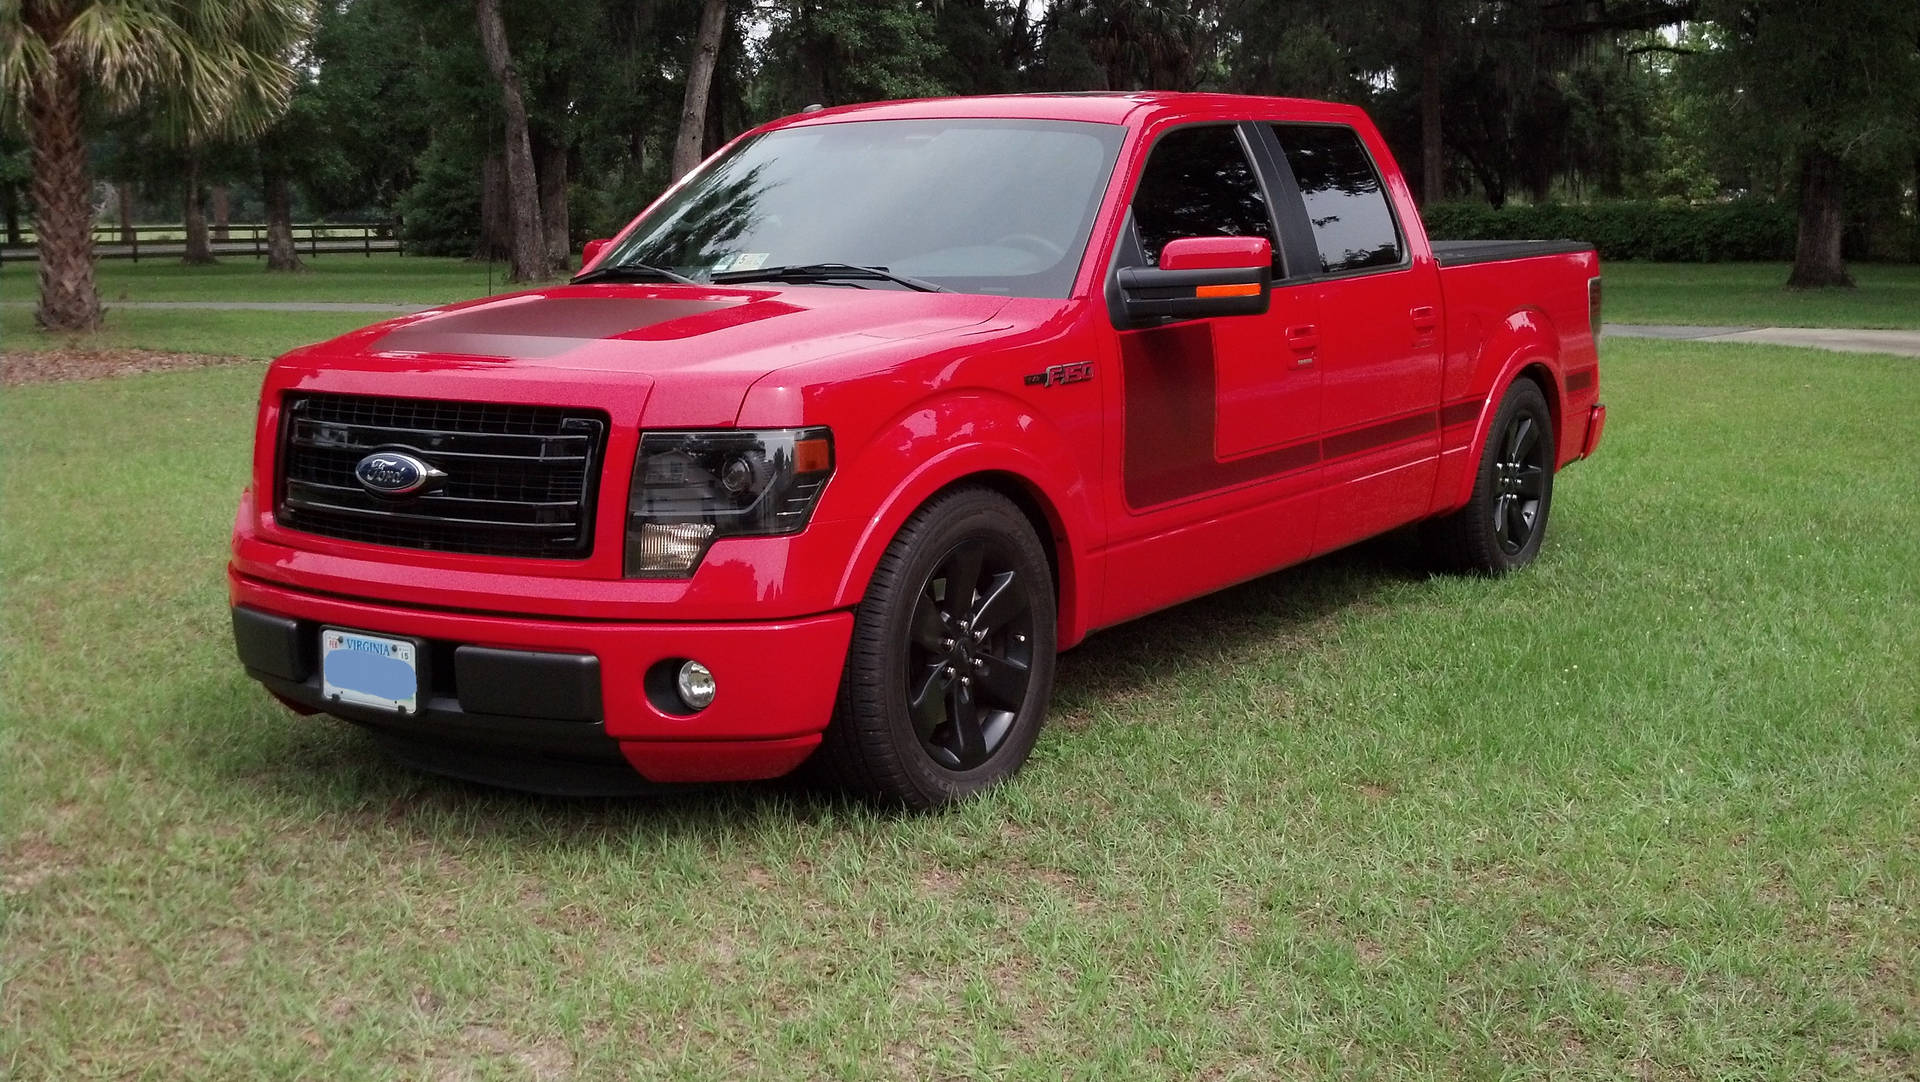 Captivating Red Dropped Truck